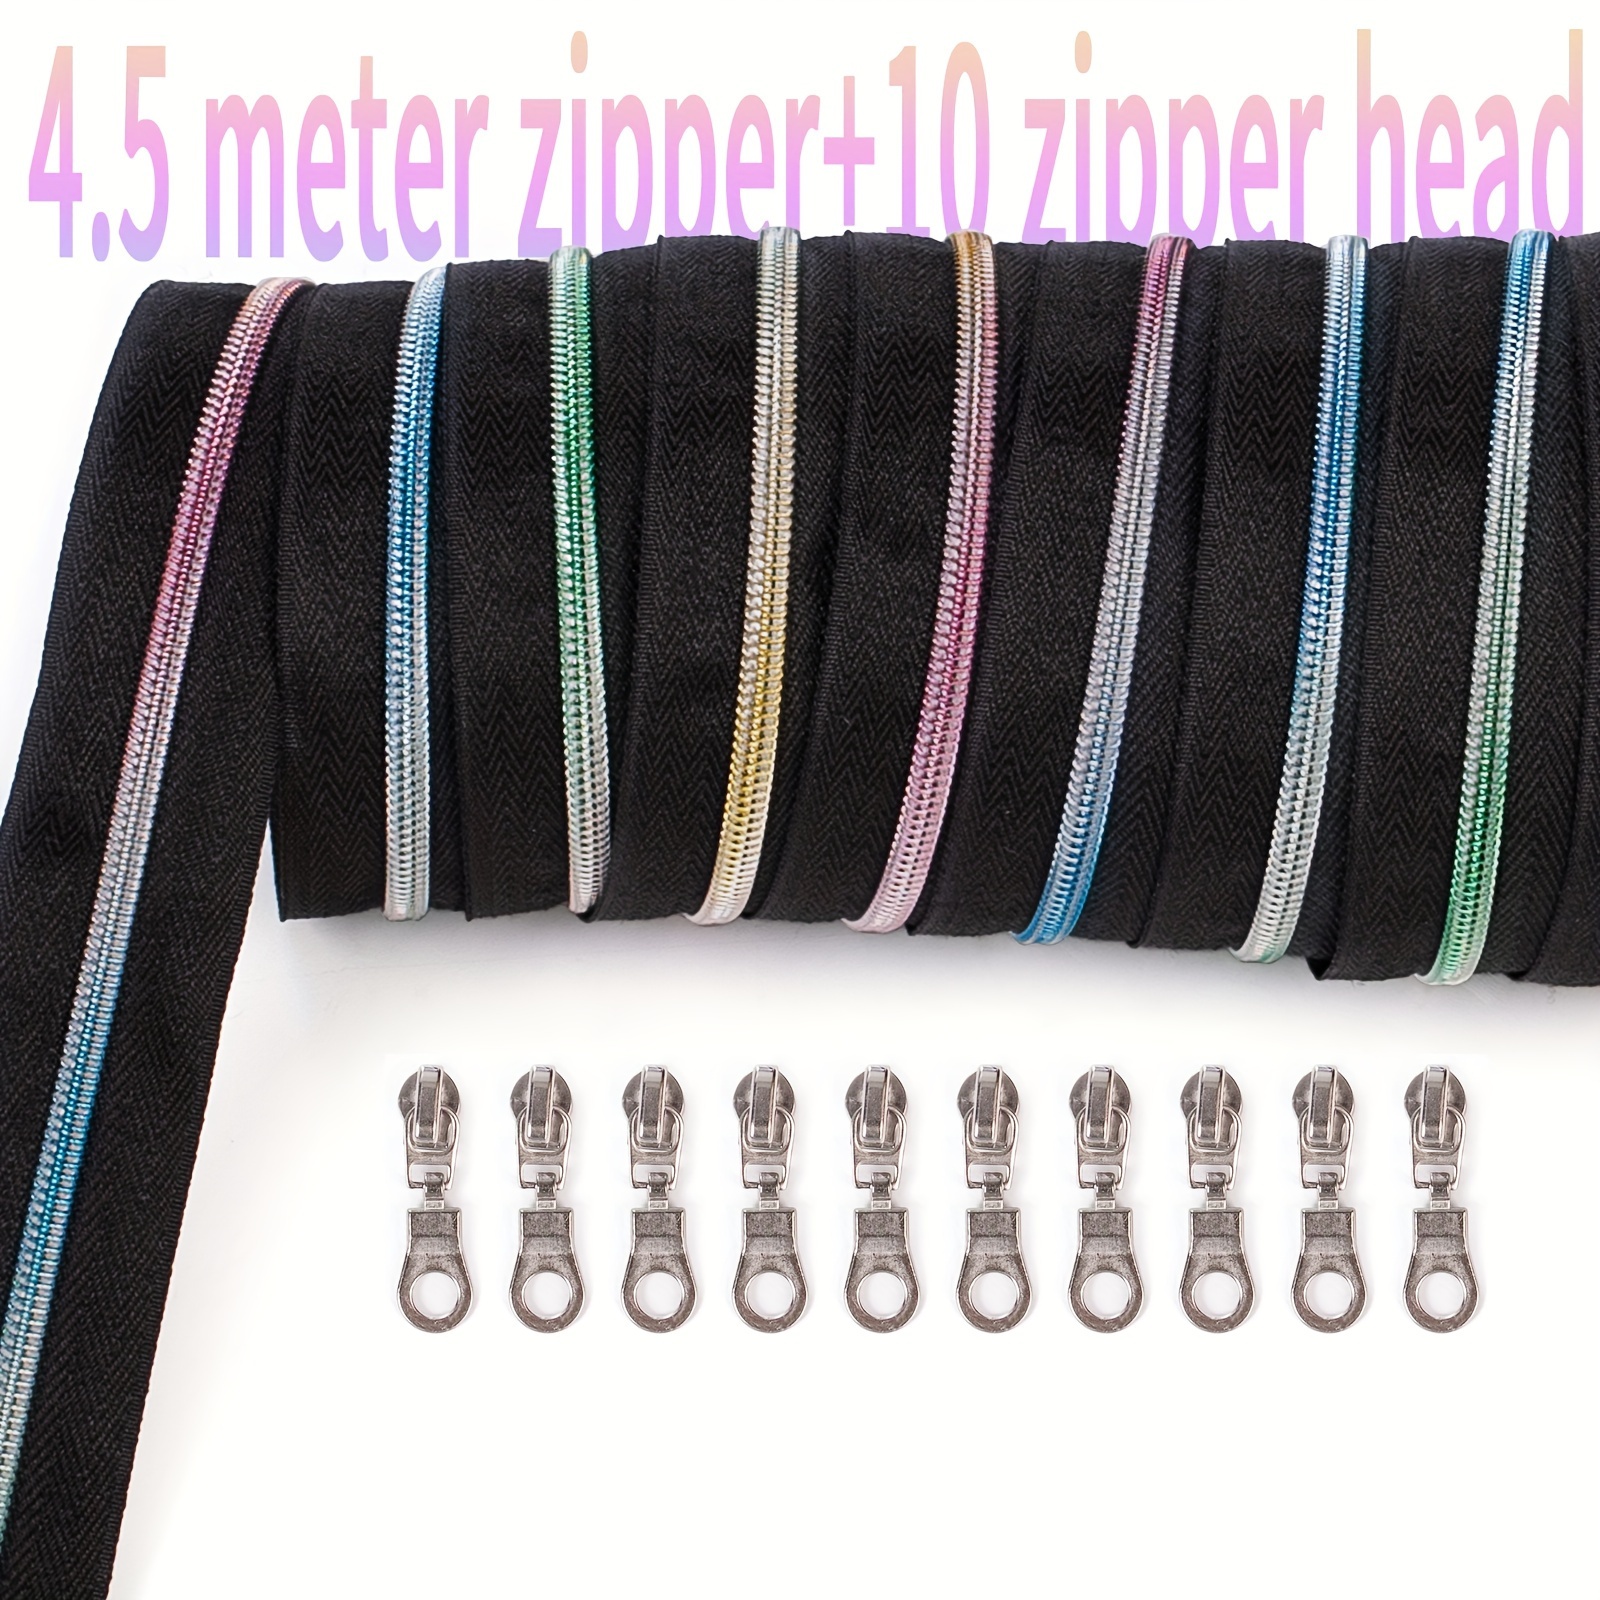 1 Set 177.17 Inch Long Zipper, 10 Zipper Head, 20 Front Stop, 10 Rear Stop  No. 5 Golden Cloth Golden Tooth, Silvery Cloth Silvery Tooth Nylon Size Zip